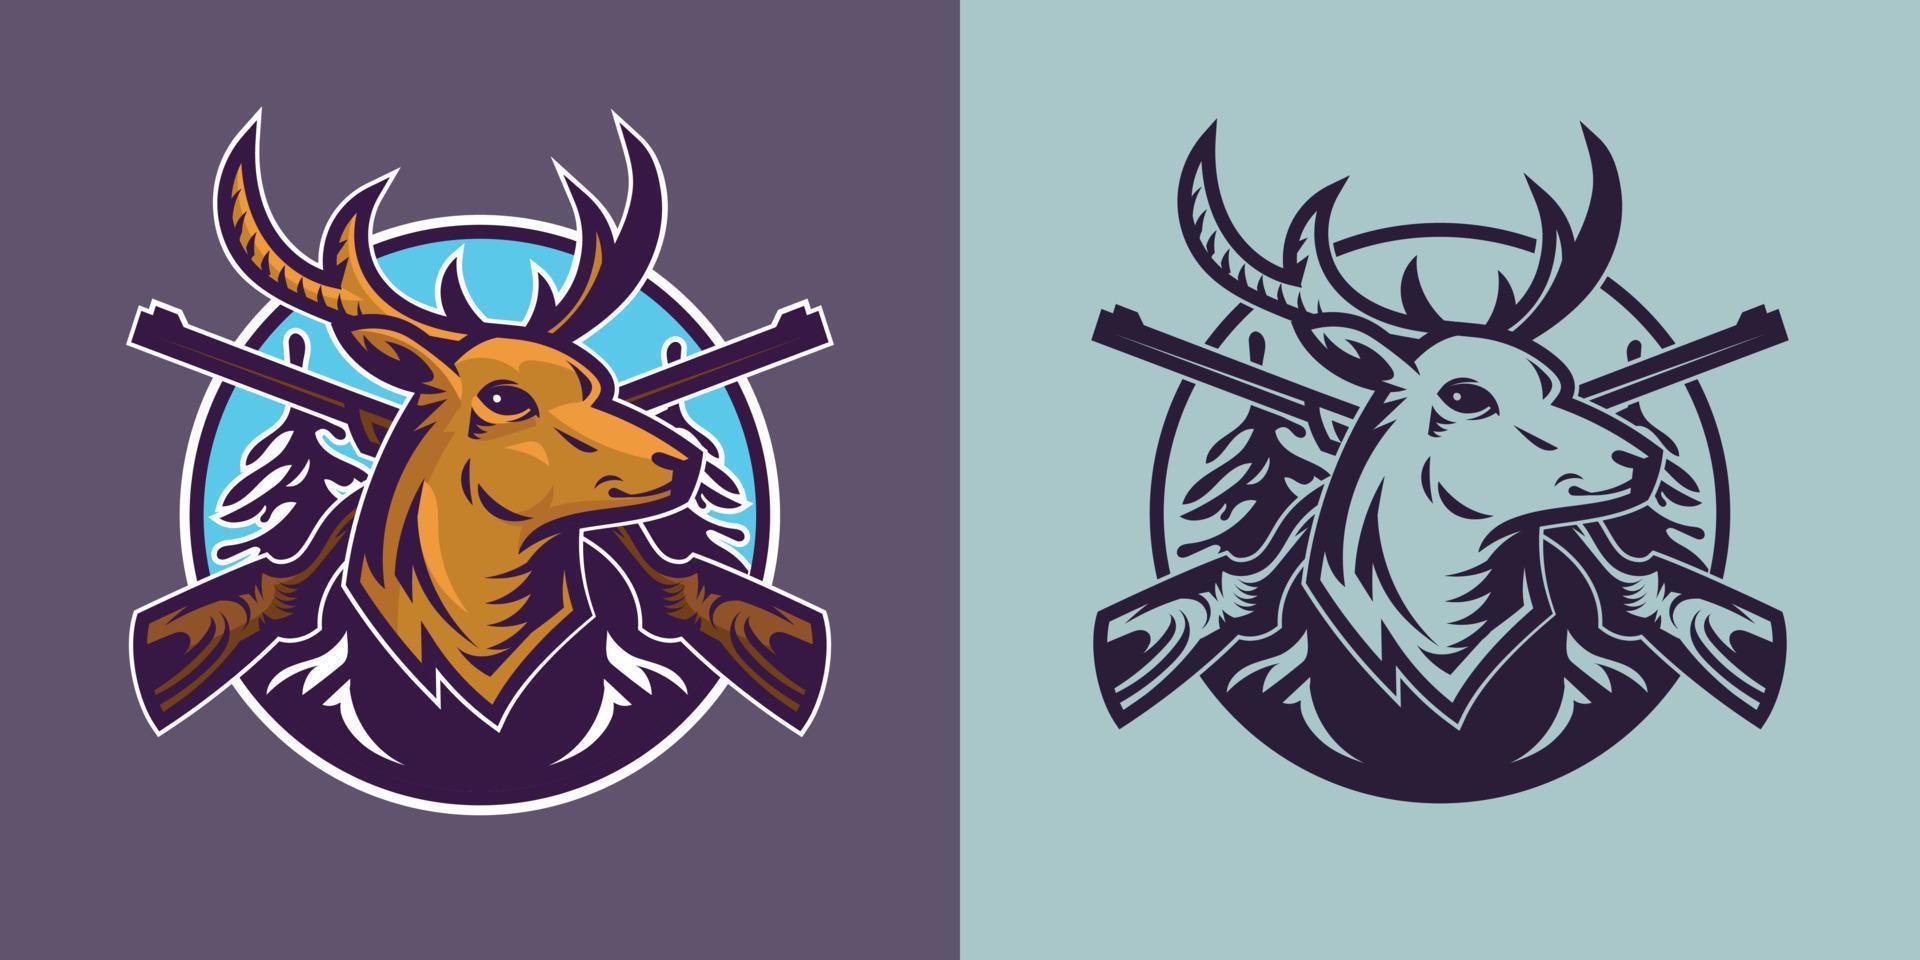 Deer head with rifles in different styles. Concept art of hunting. vector